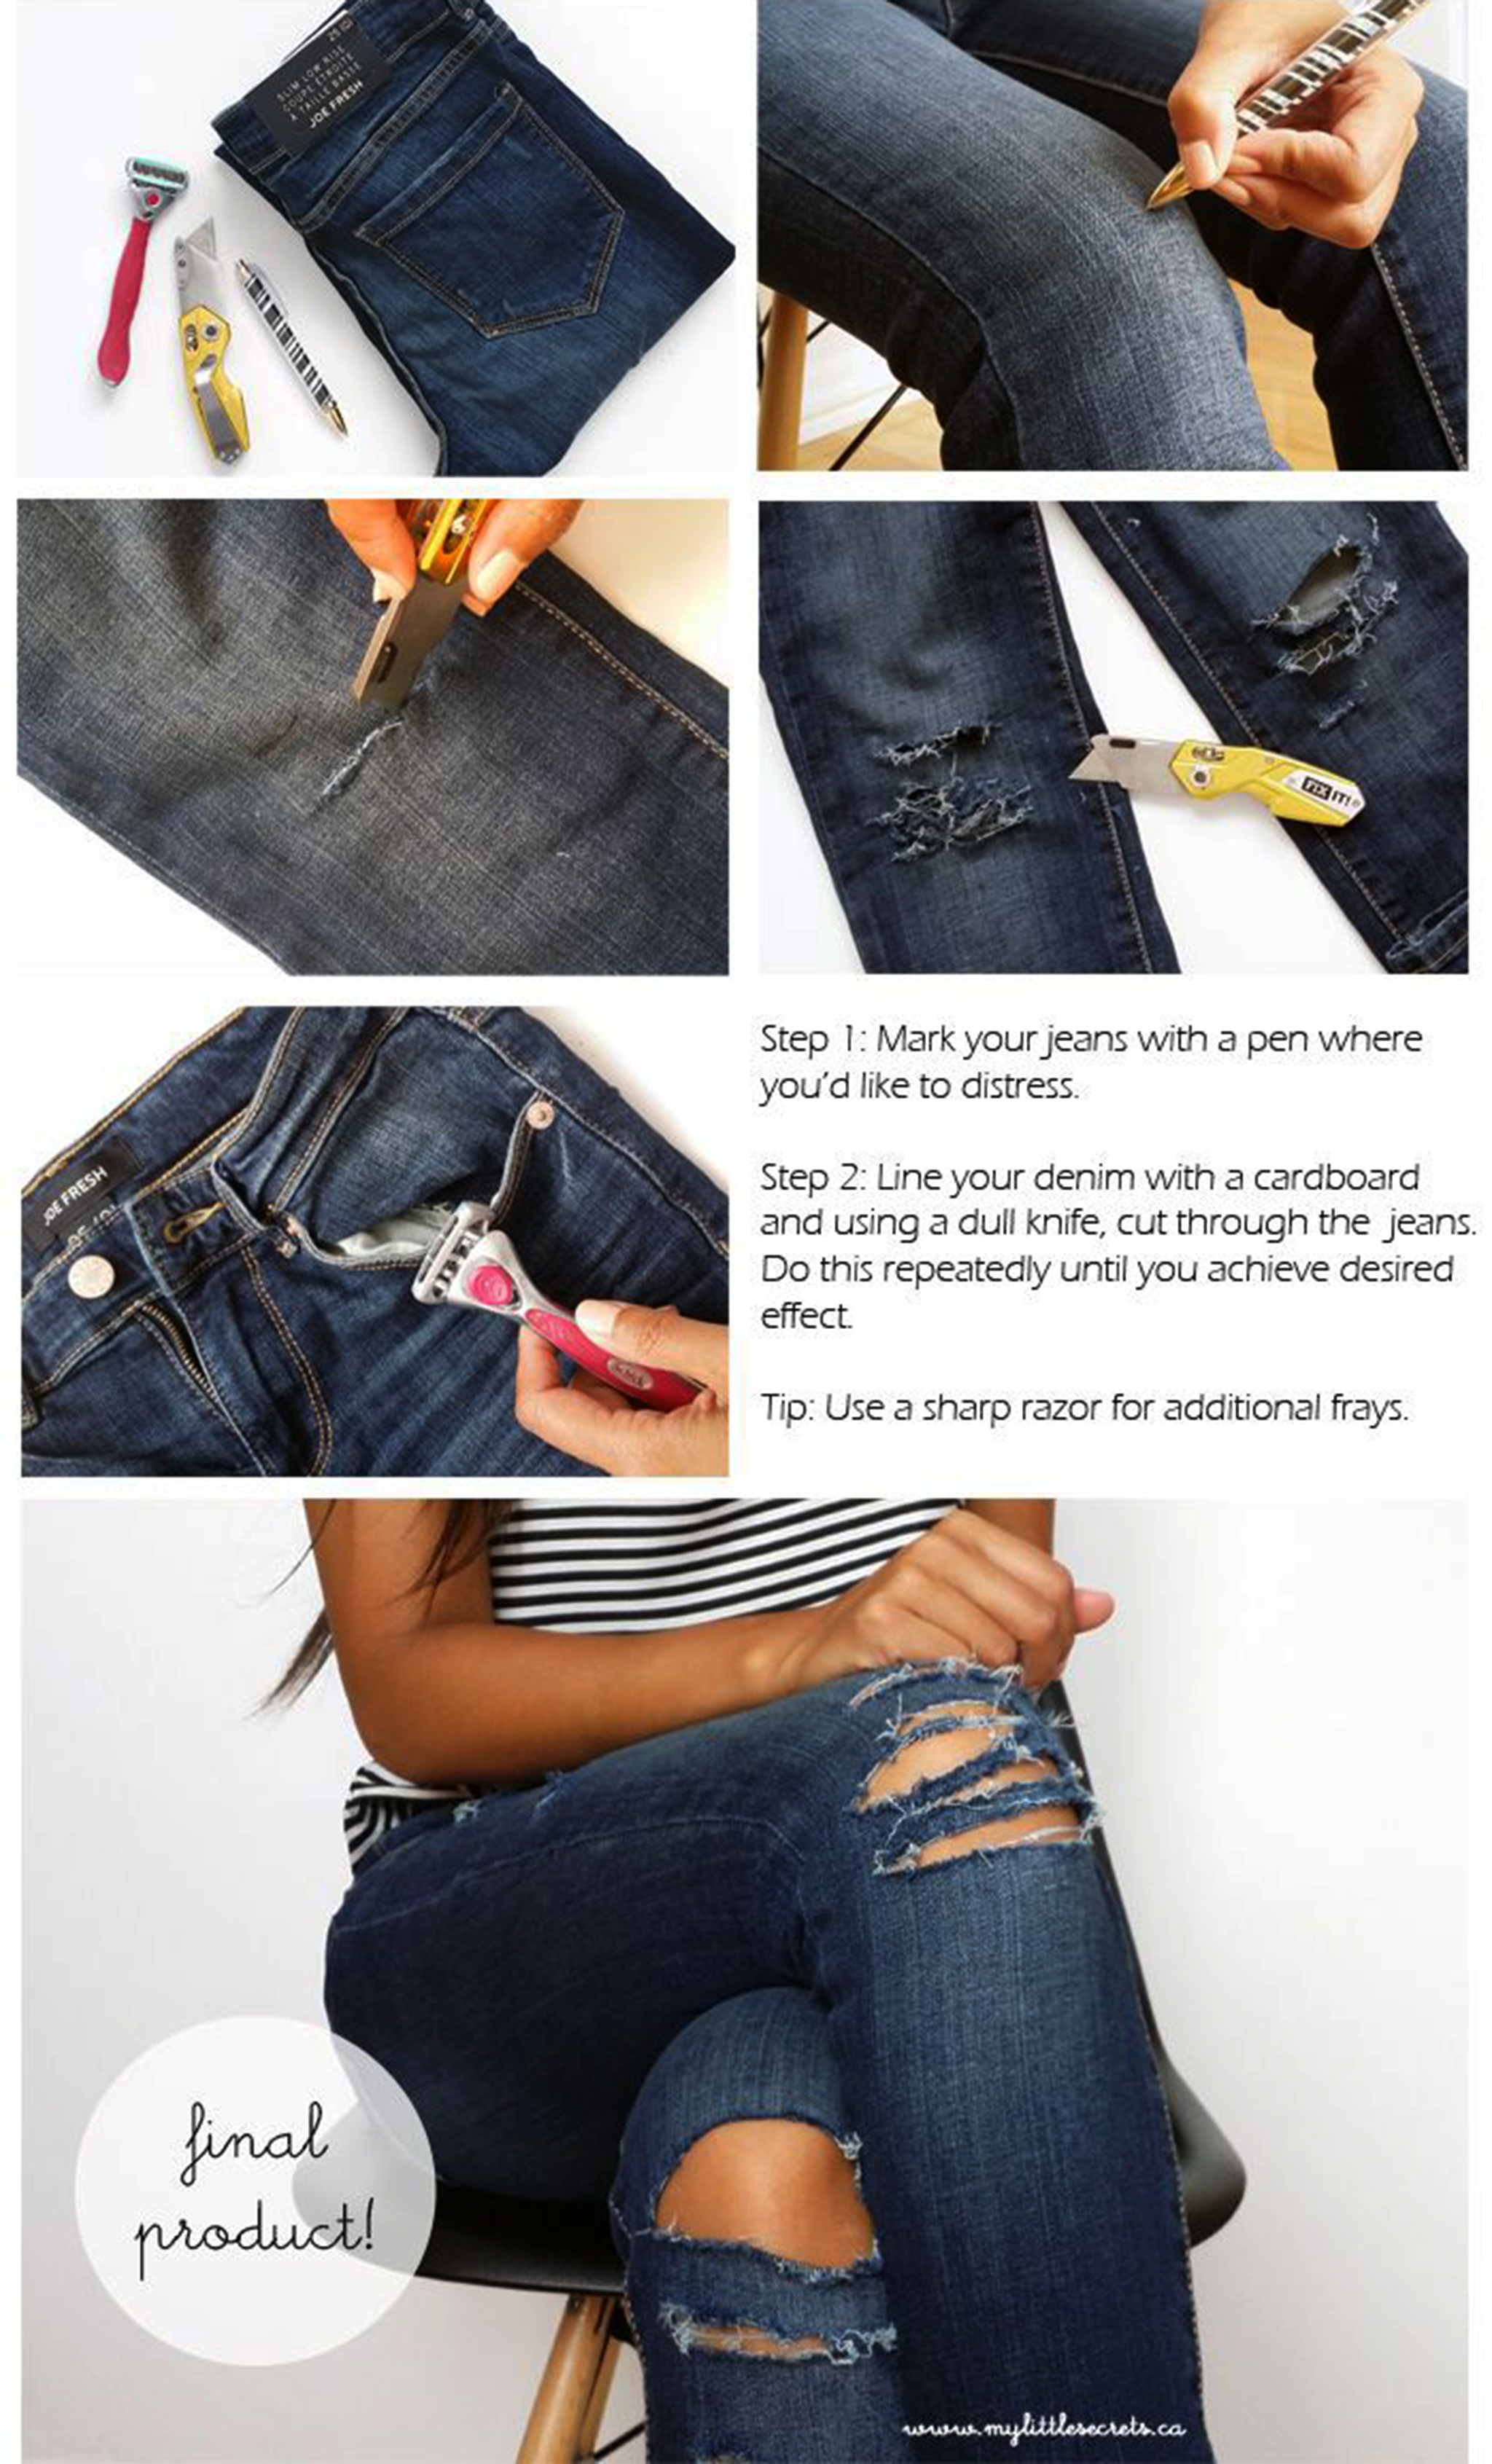 7 Awesome Denim Tricks For Those Love Wearing Jeans